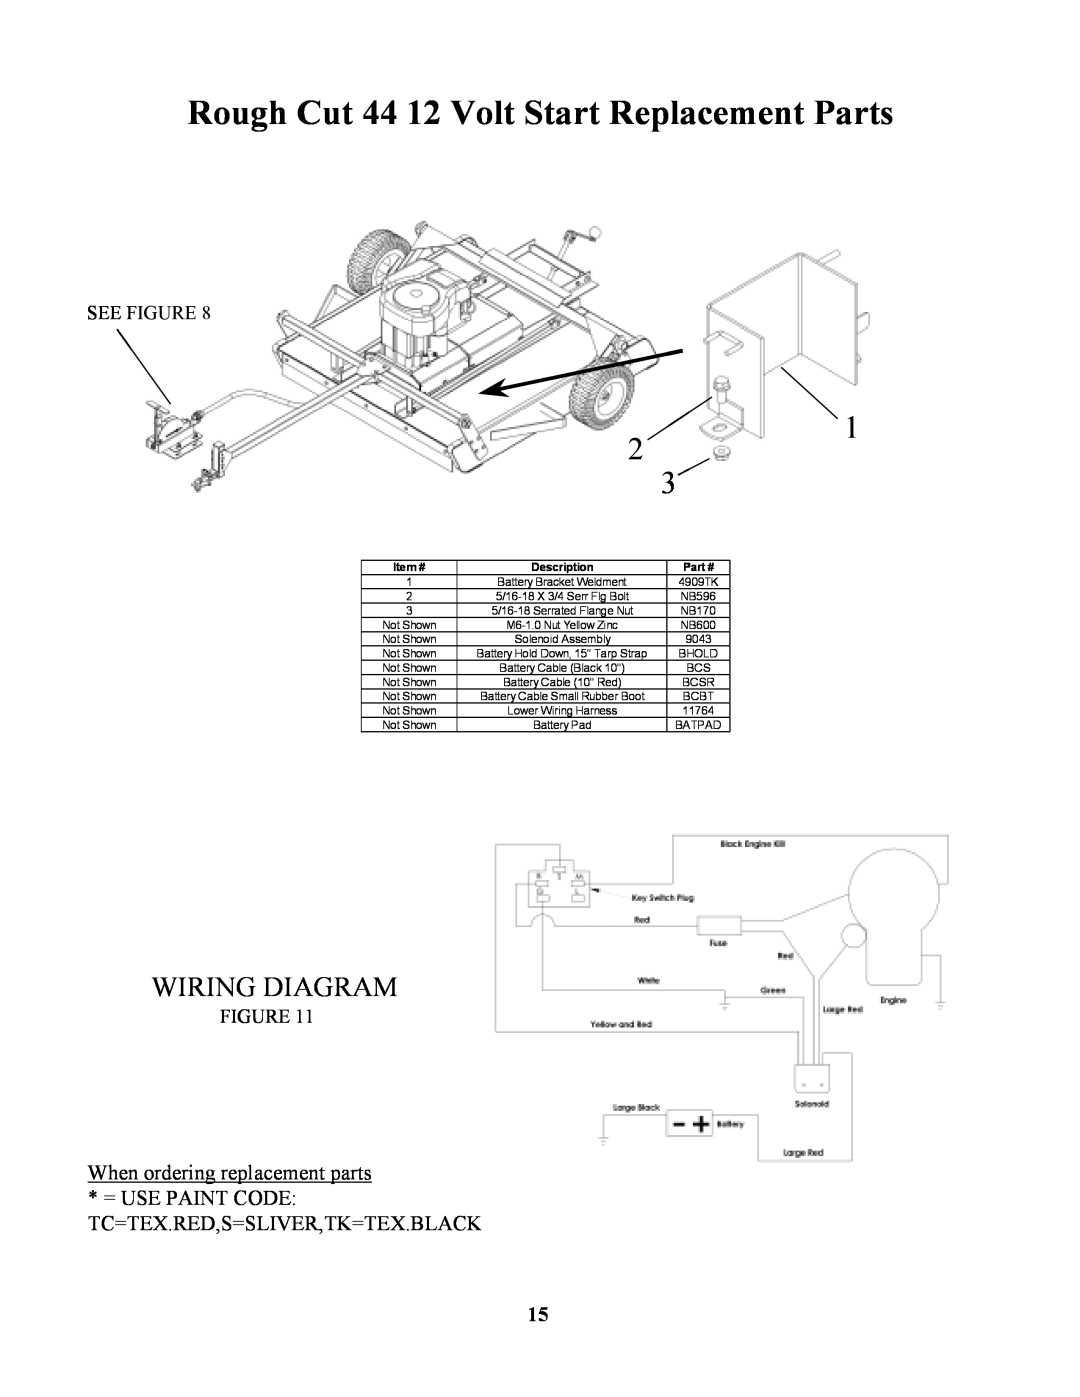 Swisher RTB105441, POLB10544HD, RTB1254412V Rough Cut 44 12 Volt Start Replacement Parts, Wiring Diagram, See Figure 